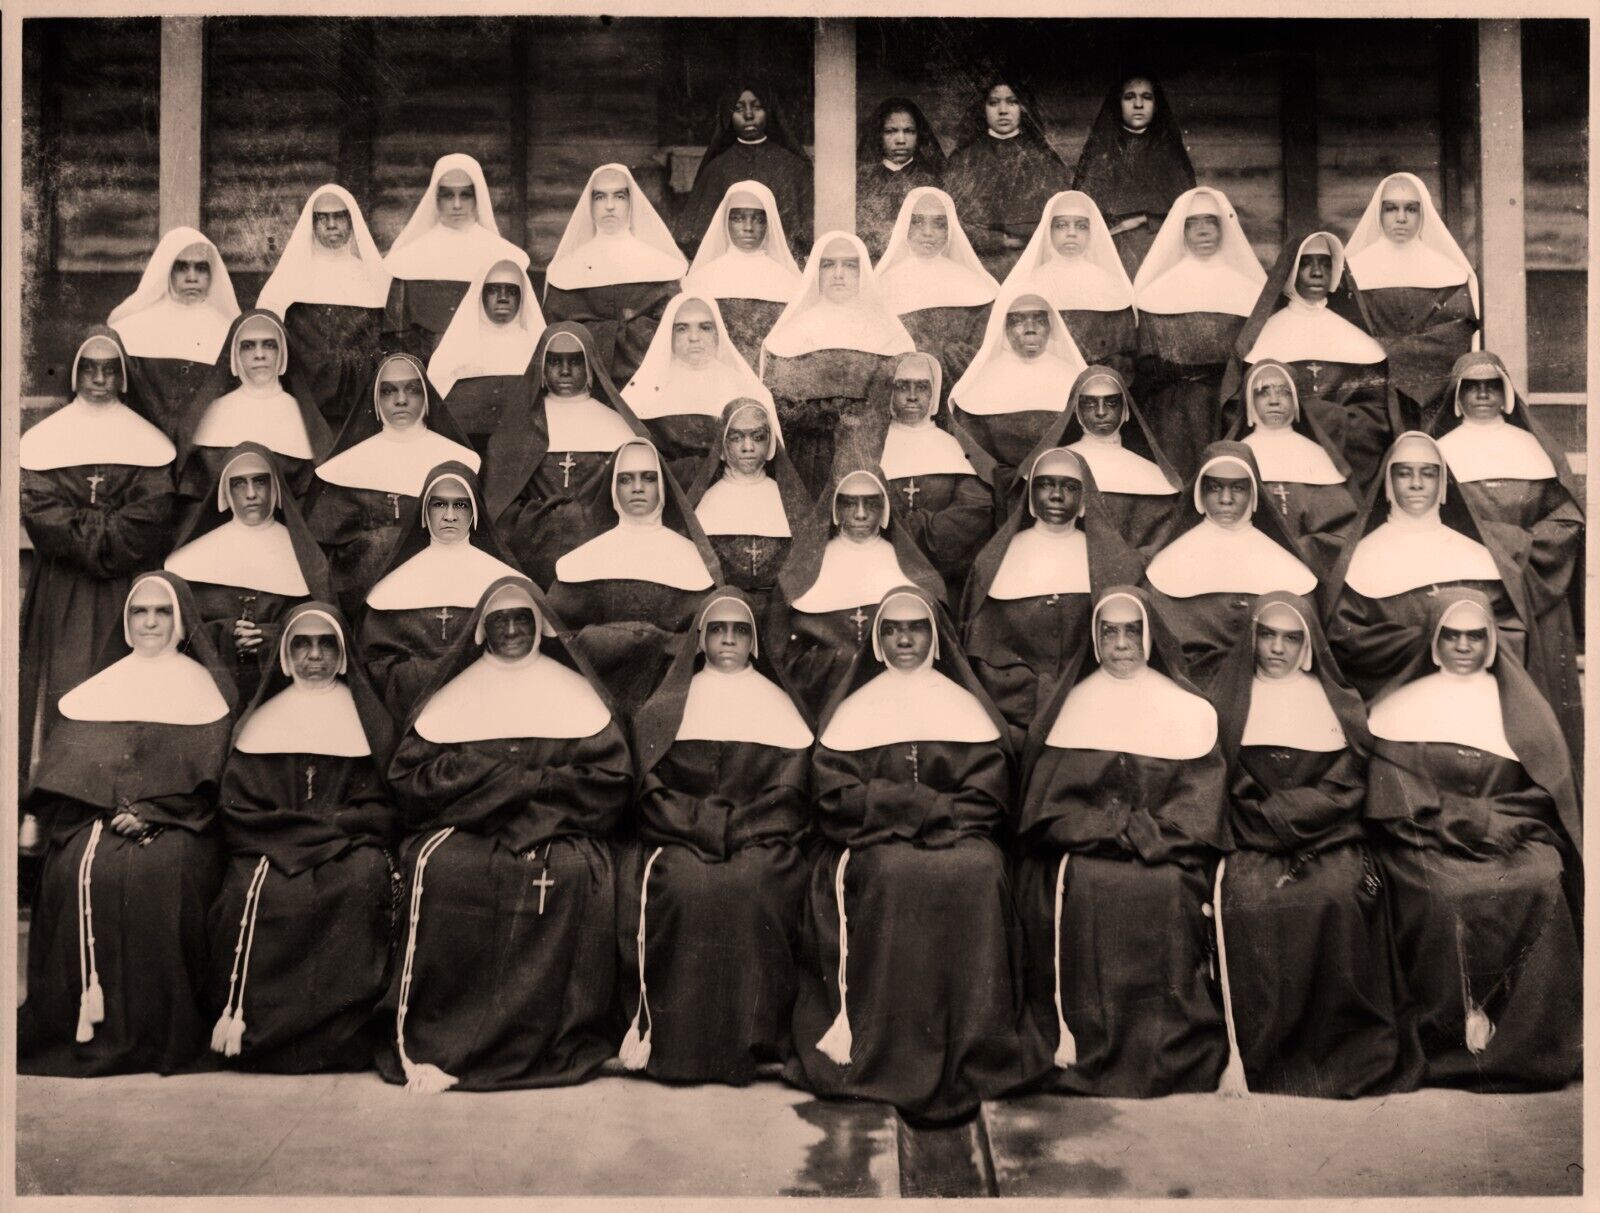 Historical Photo Print African American Nuns late 19th Century